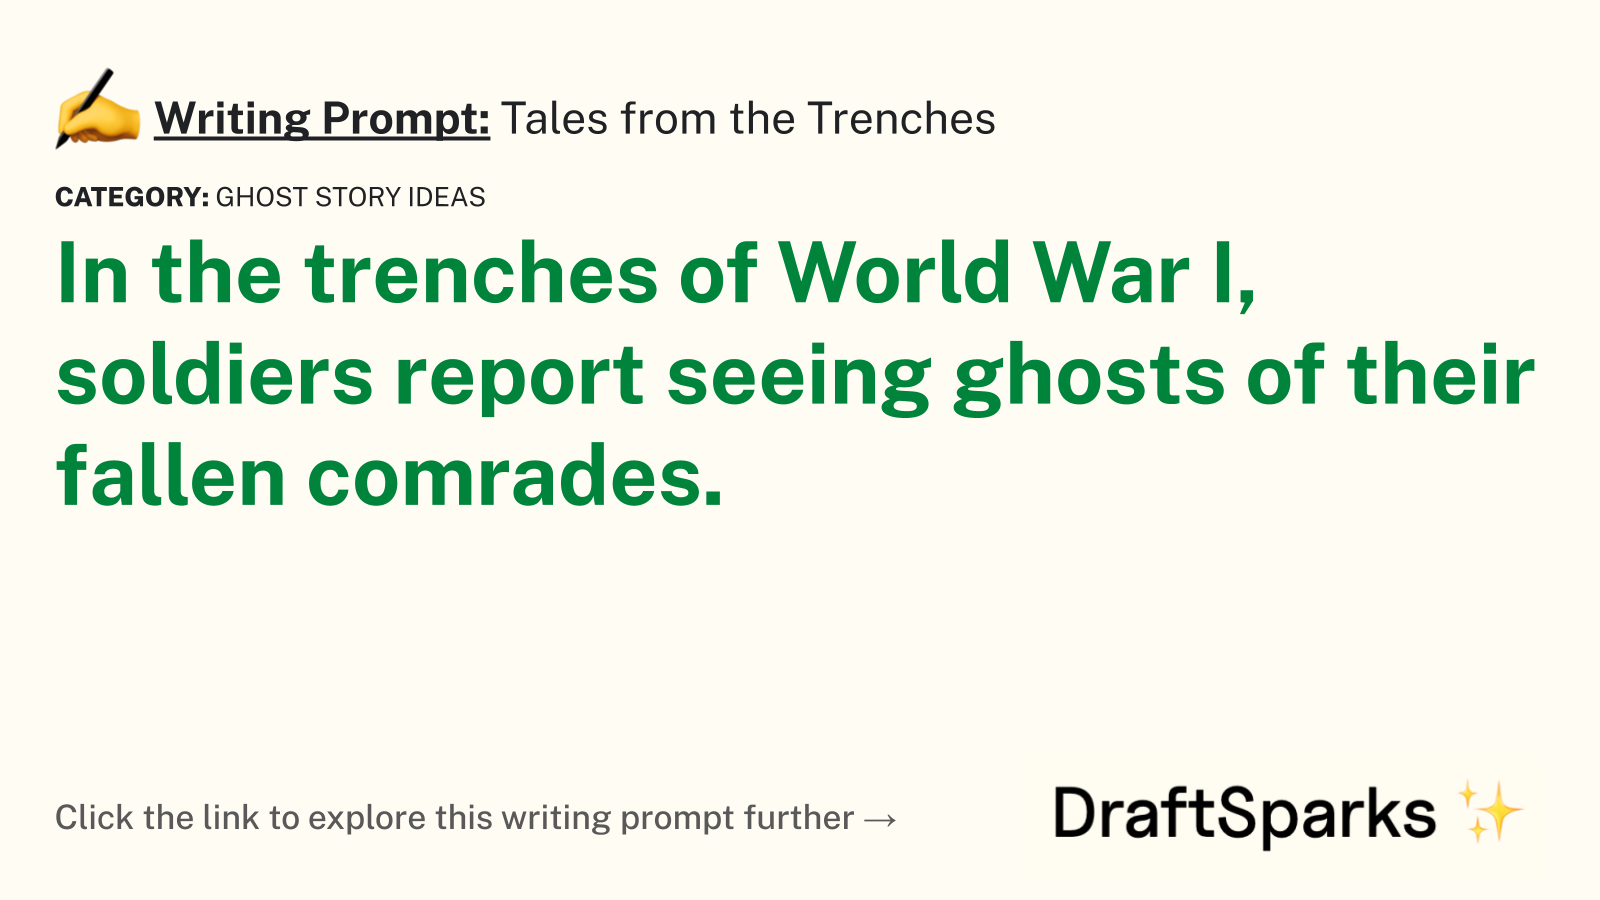 Tales from the Trenches